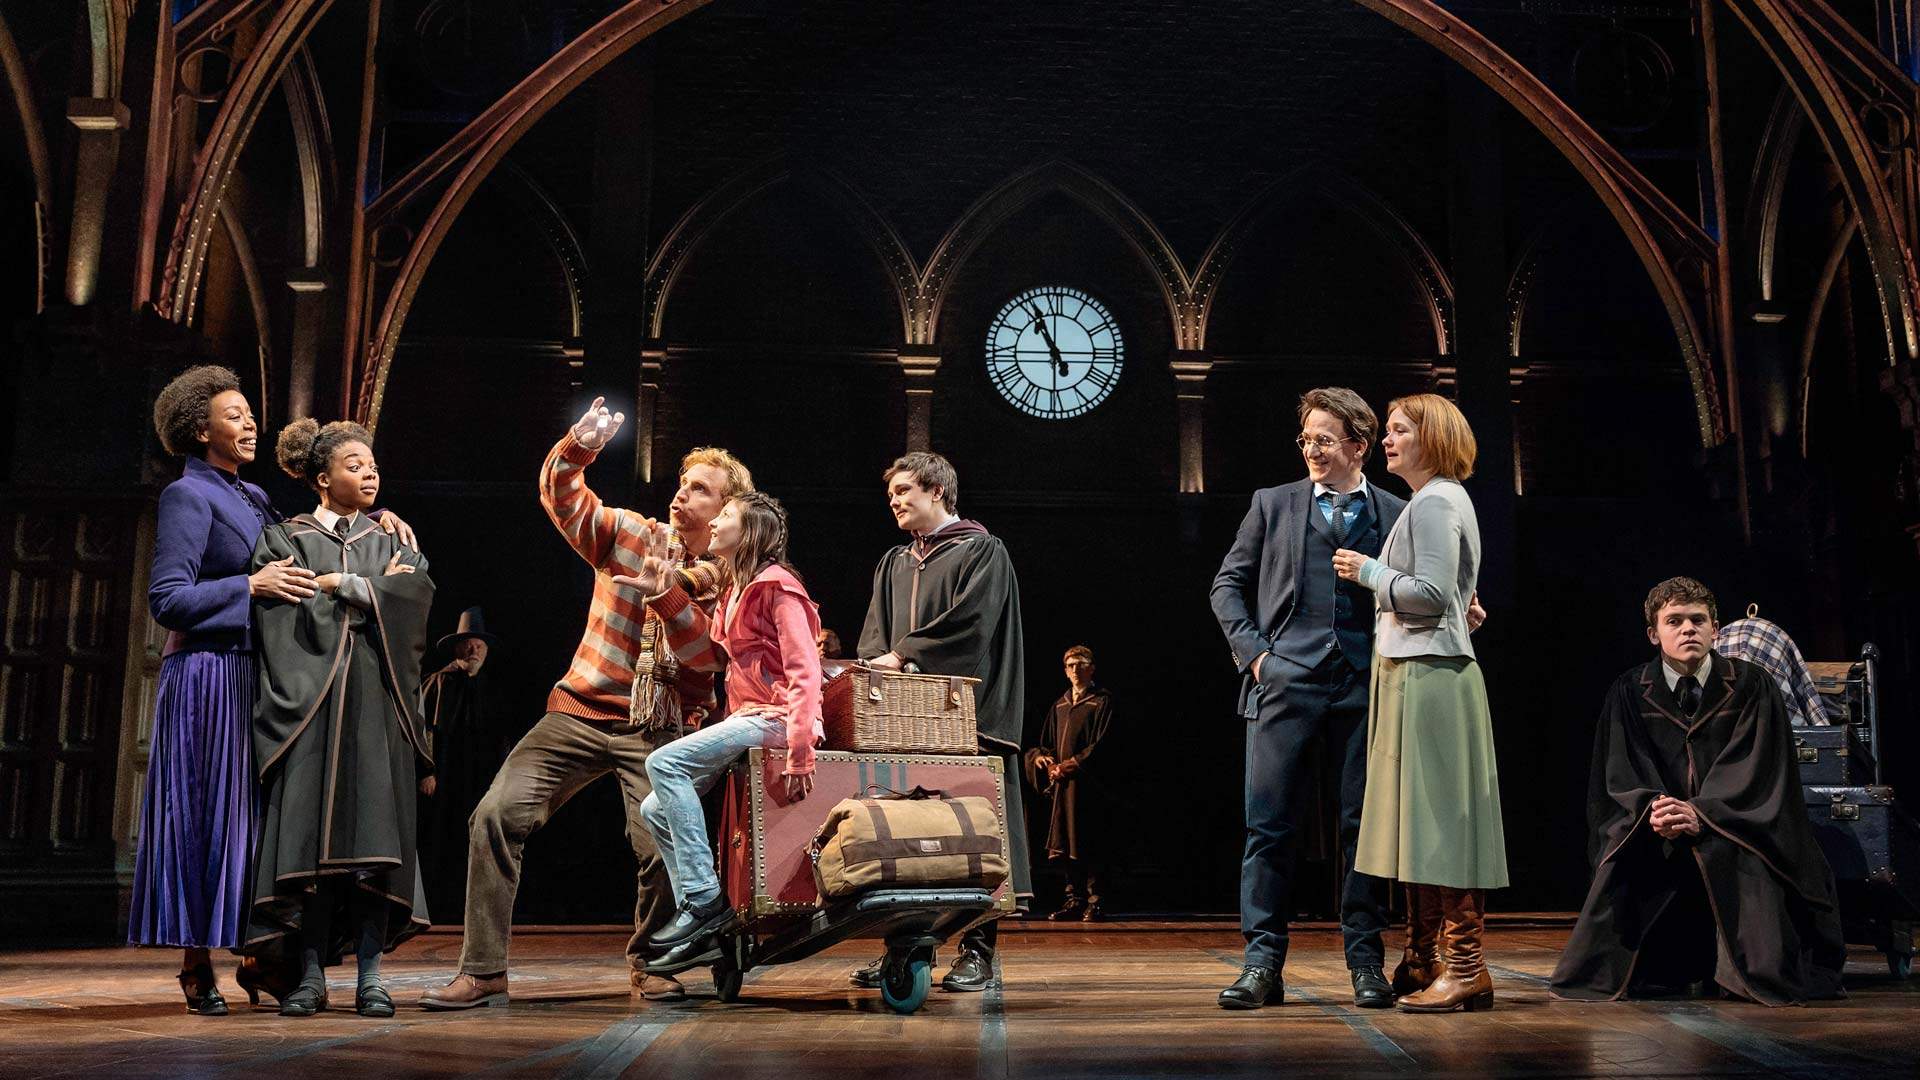 JK Rowling's Stage Production 'Harry Potter and the Cursed Child' Is Coming to Melbourne